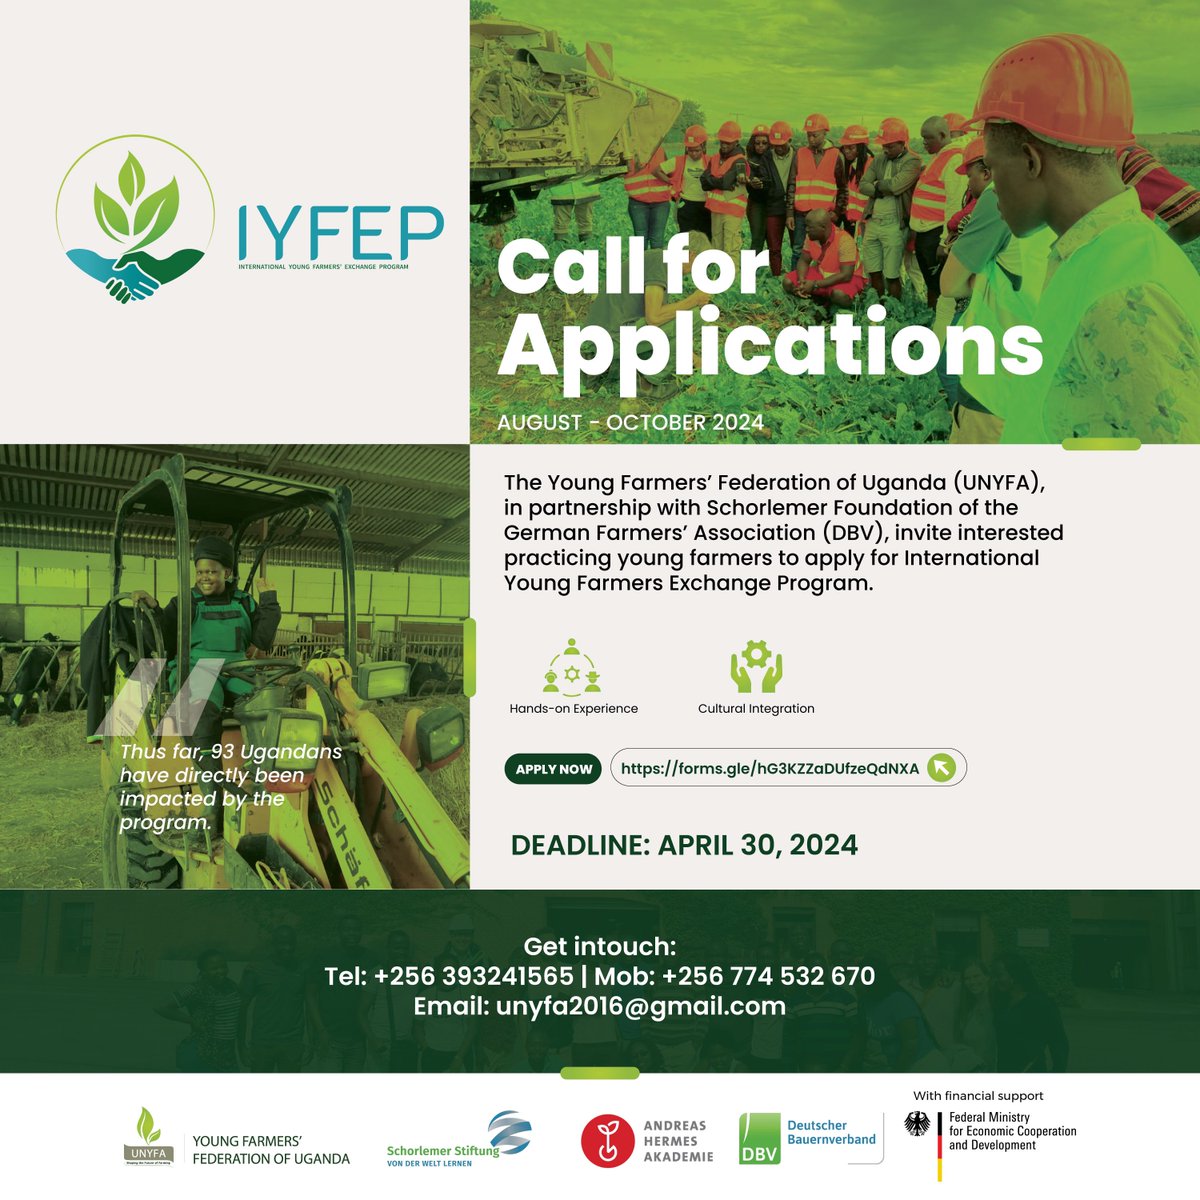 The International Young Farmers Exchange programme (IYFEP) is still accepting applications for the 9th cohort. Visit forms.gle/hG3KZZaDUfzeQd… to send in your application before tomorrow’s deadline. #IYFEP